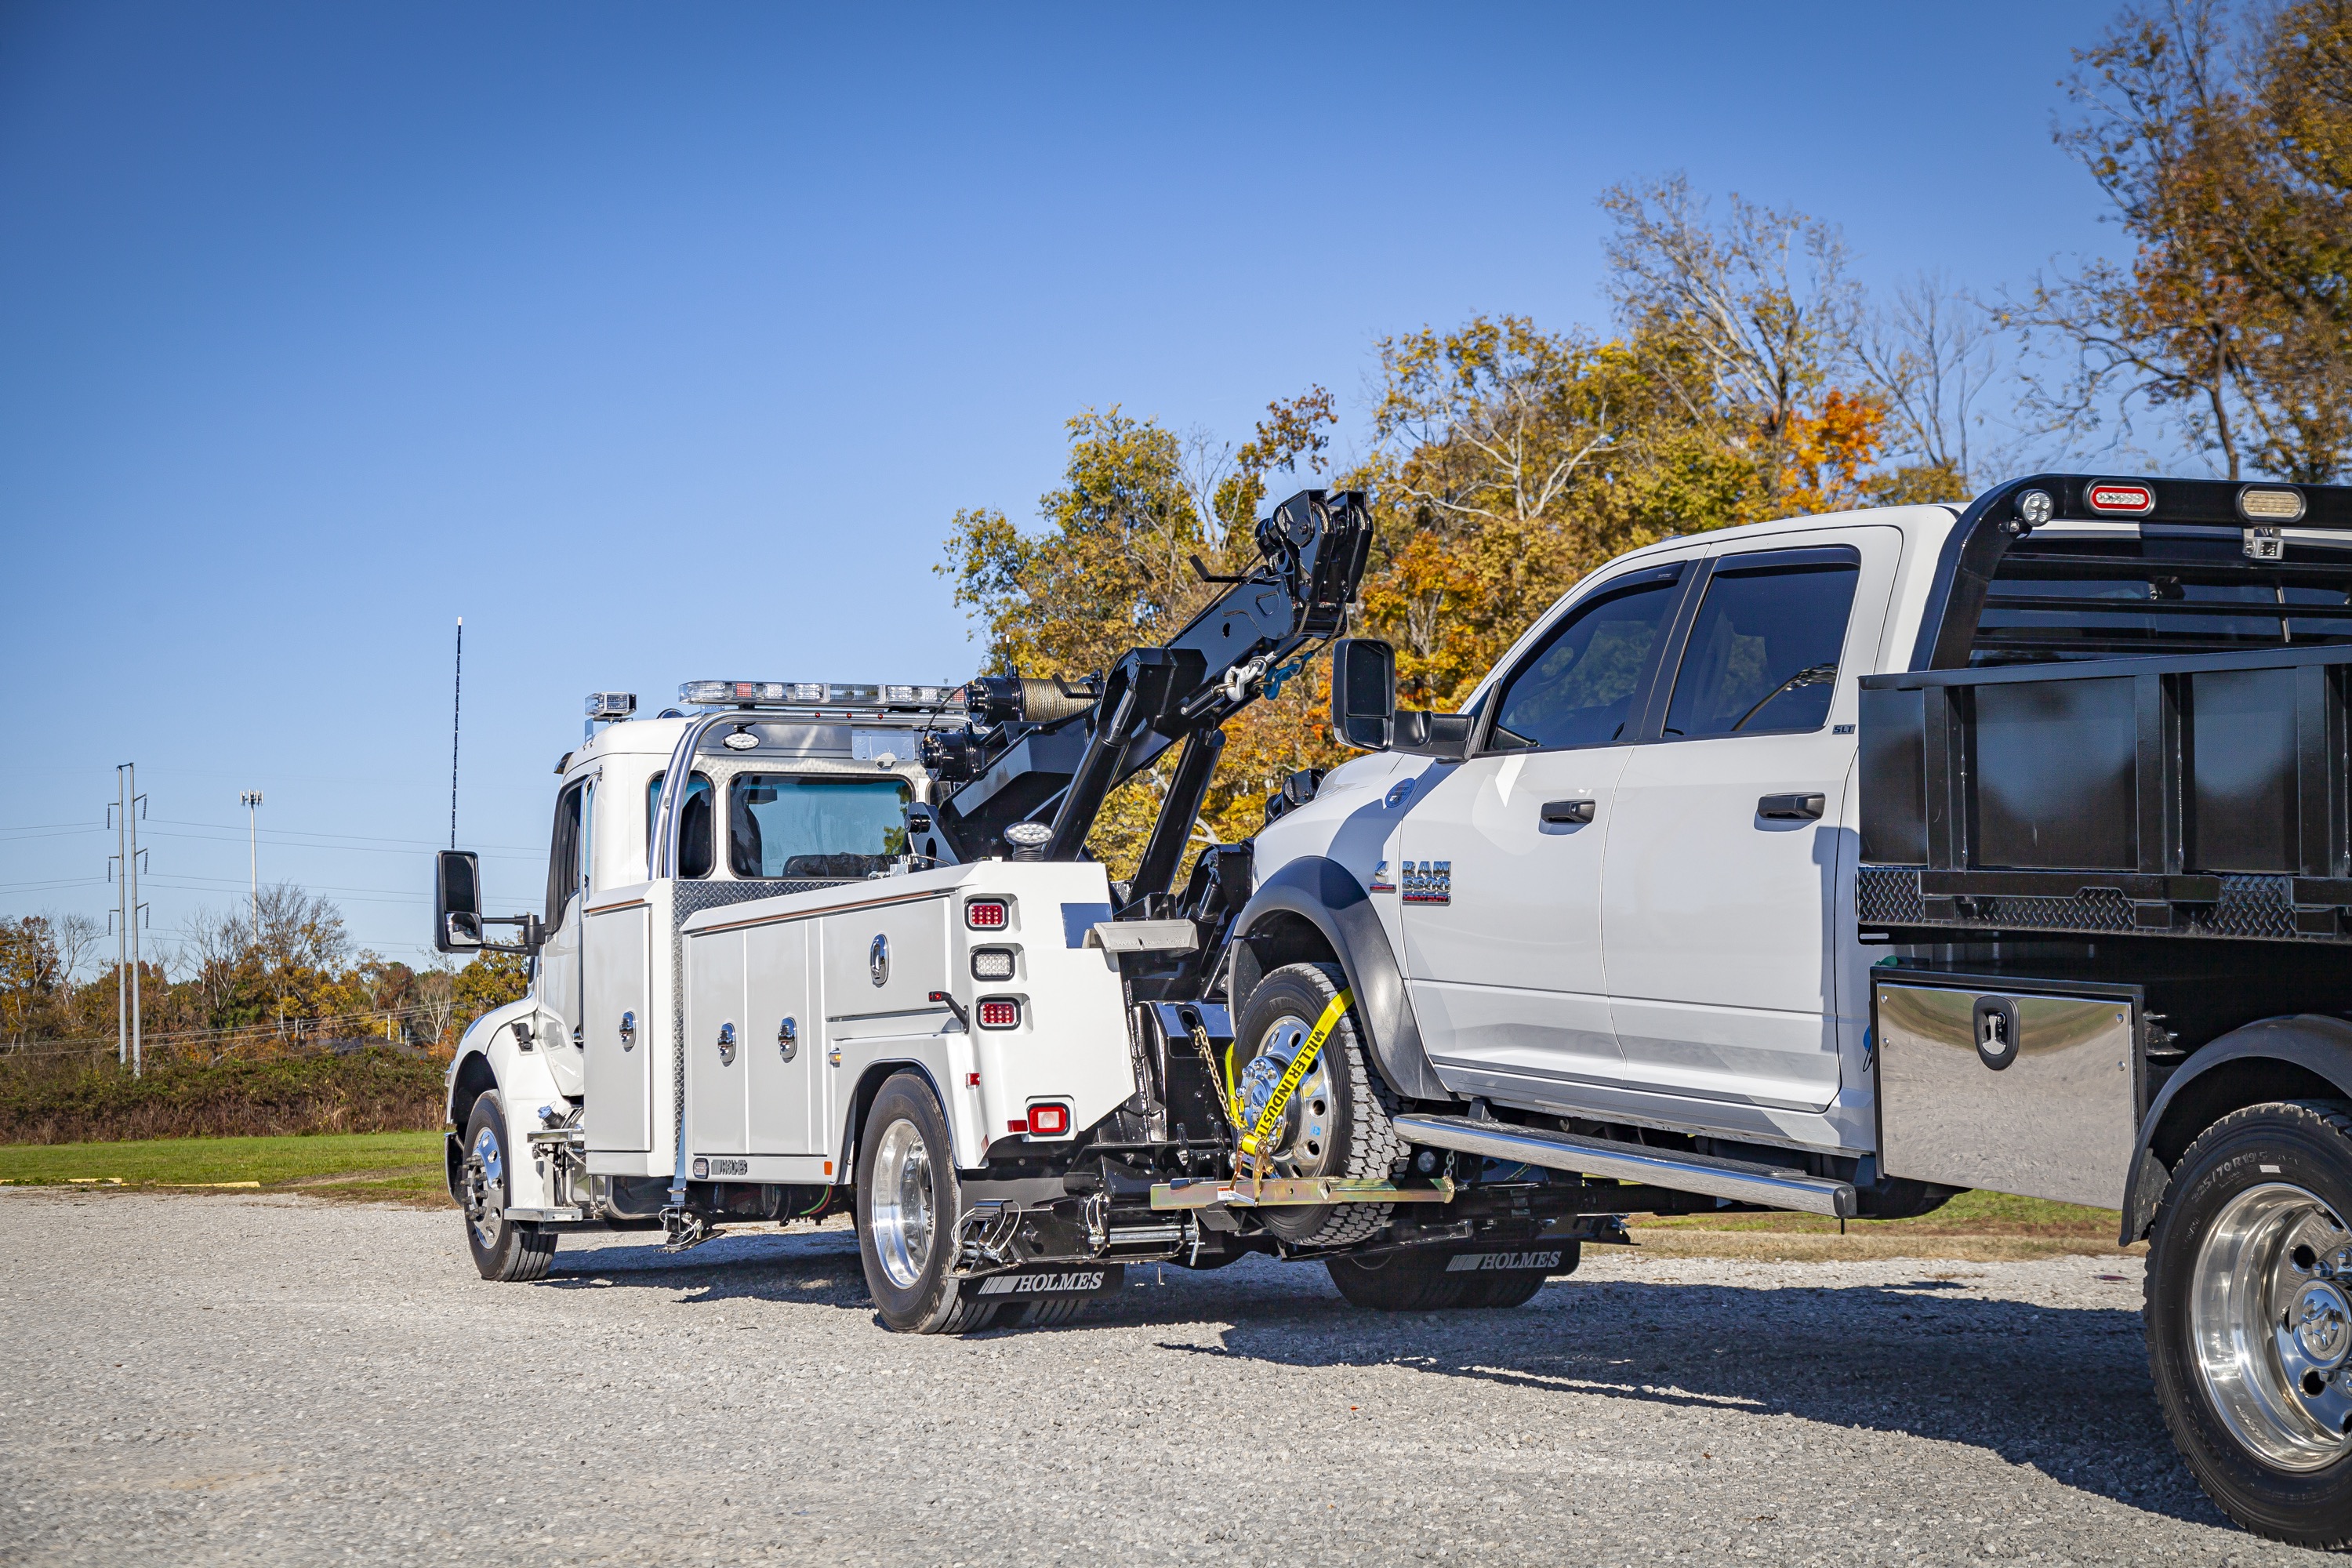 white holmes 600r rotator on a kenworth chassis towing heavy duty truck